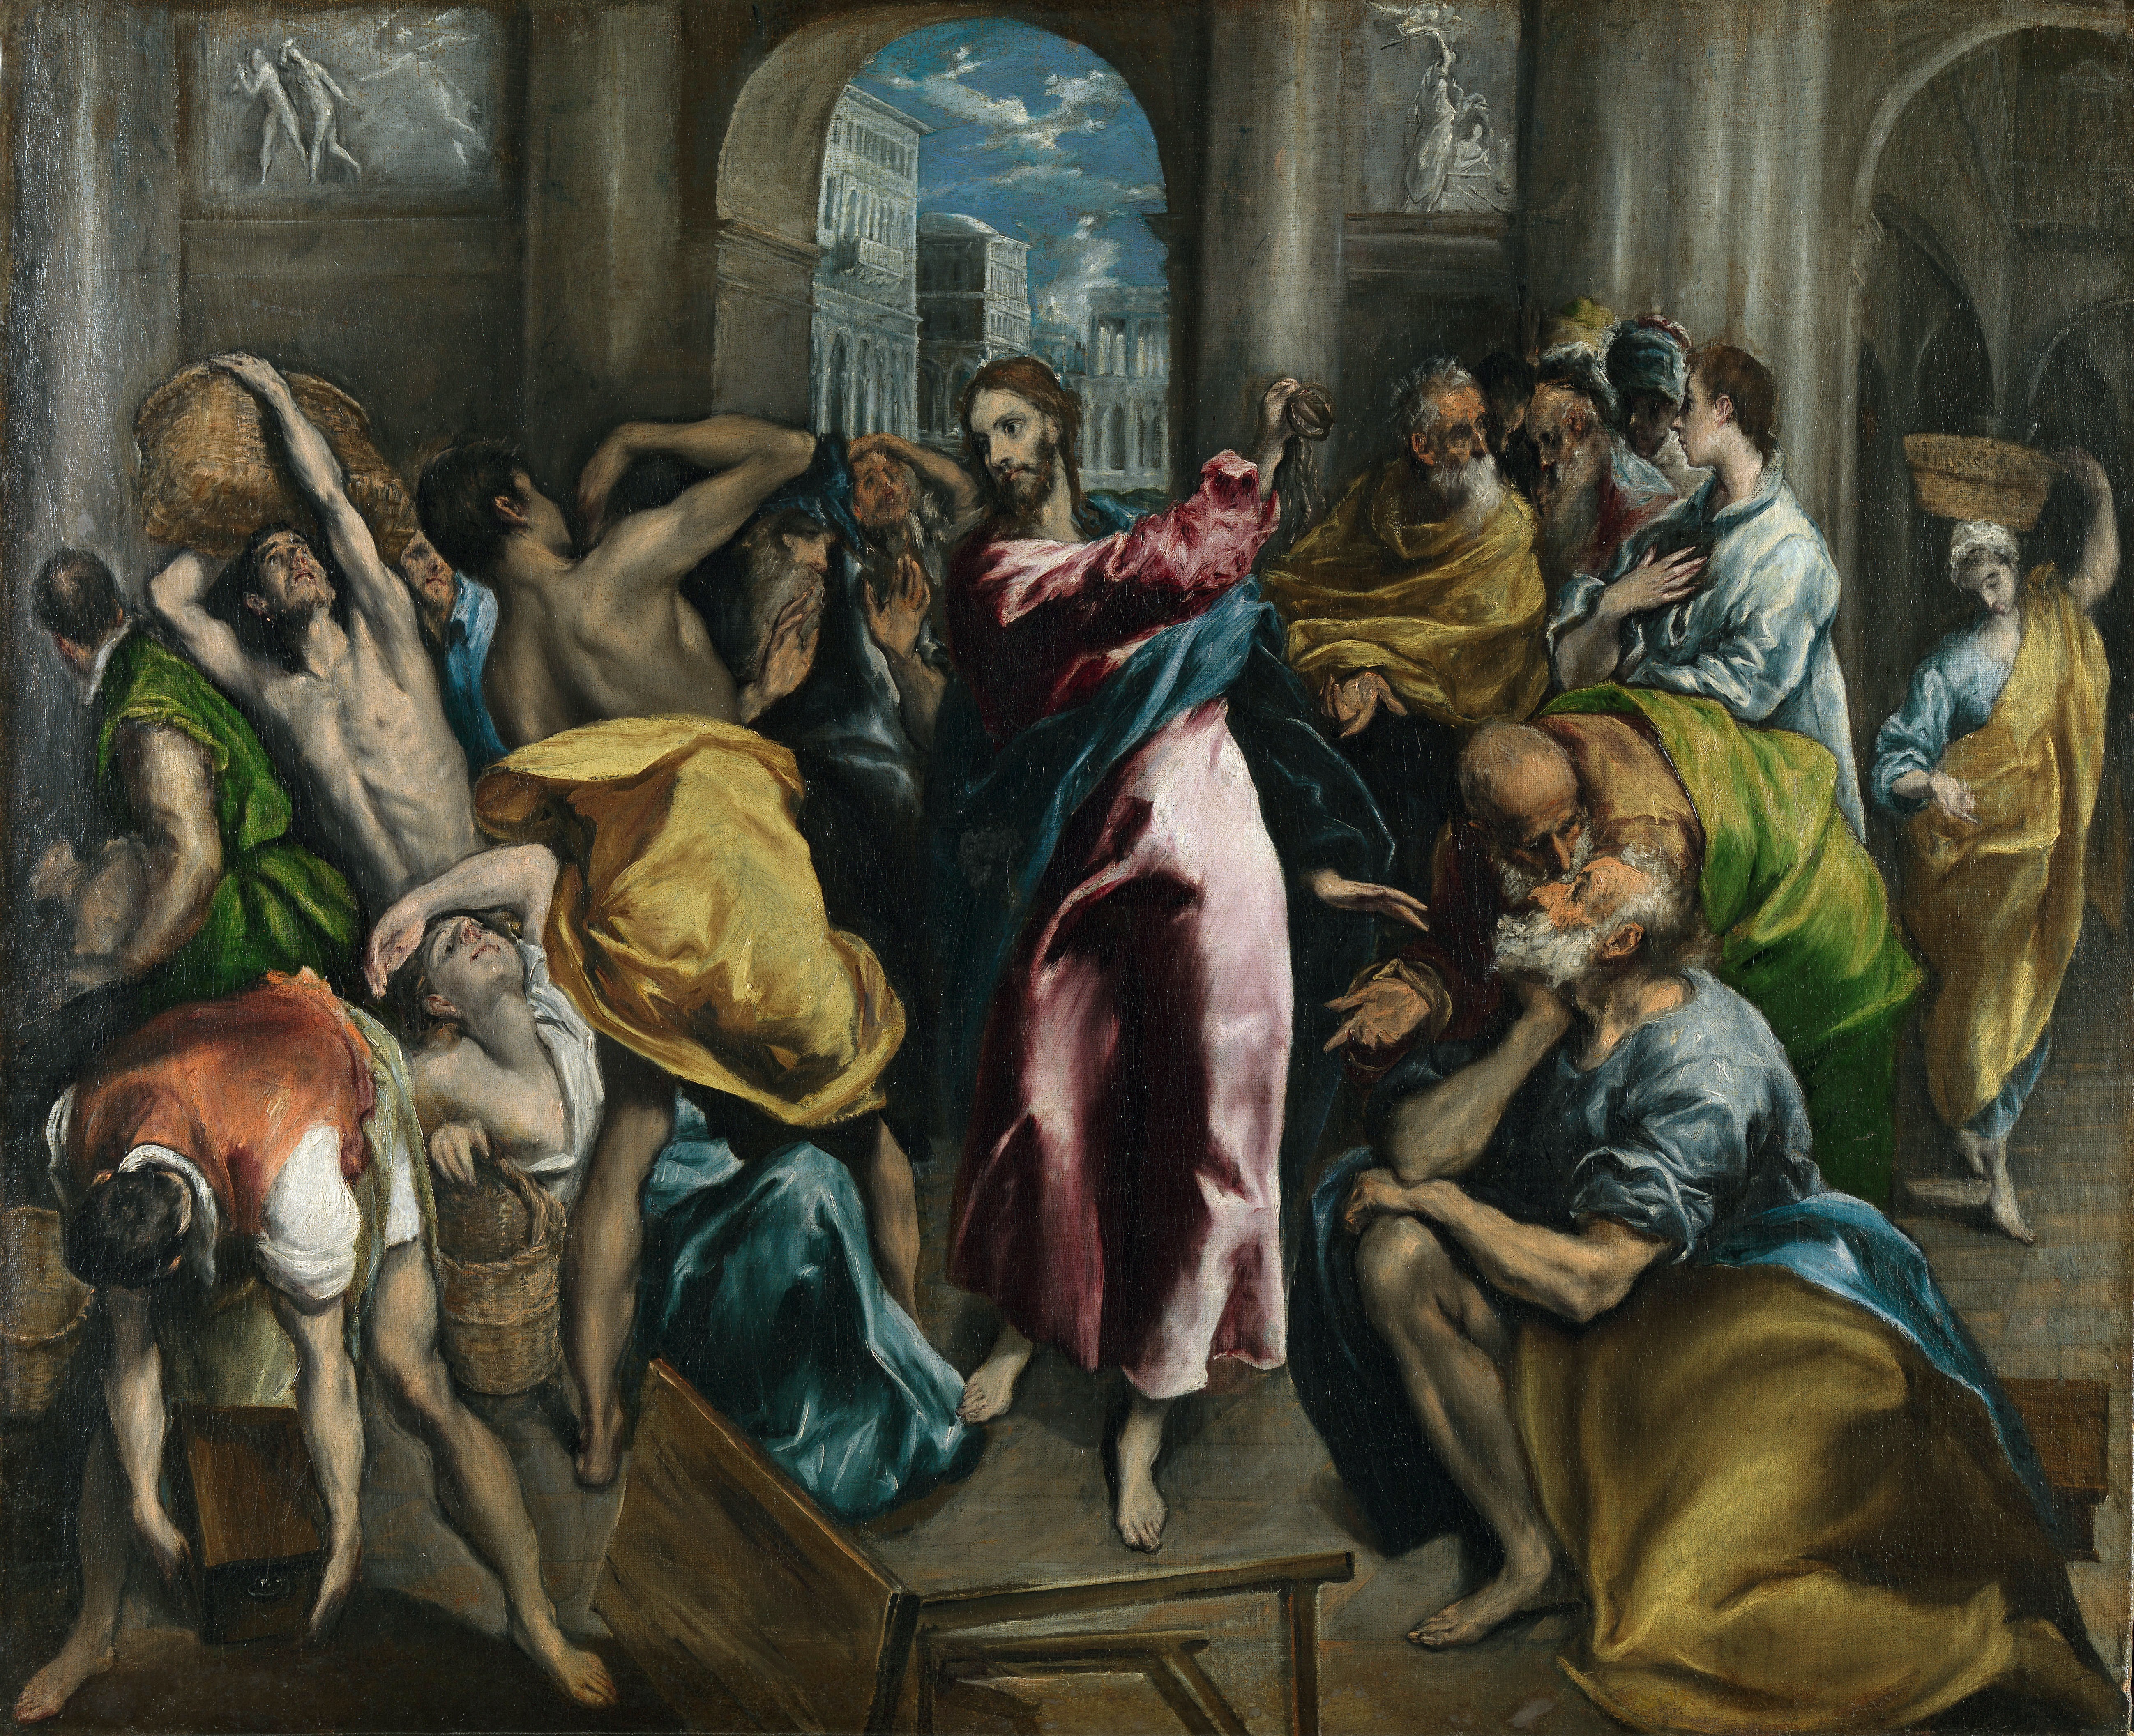 Christ driving the Traders from the Temple (1600).